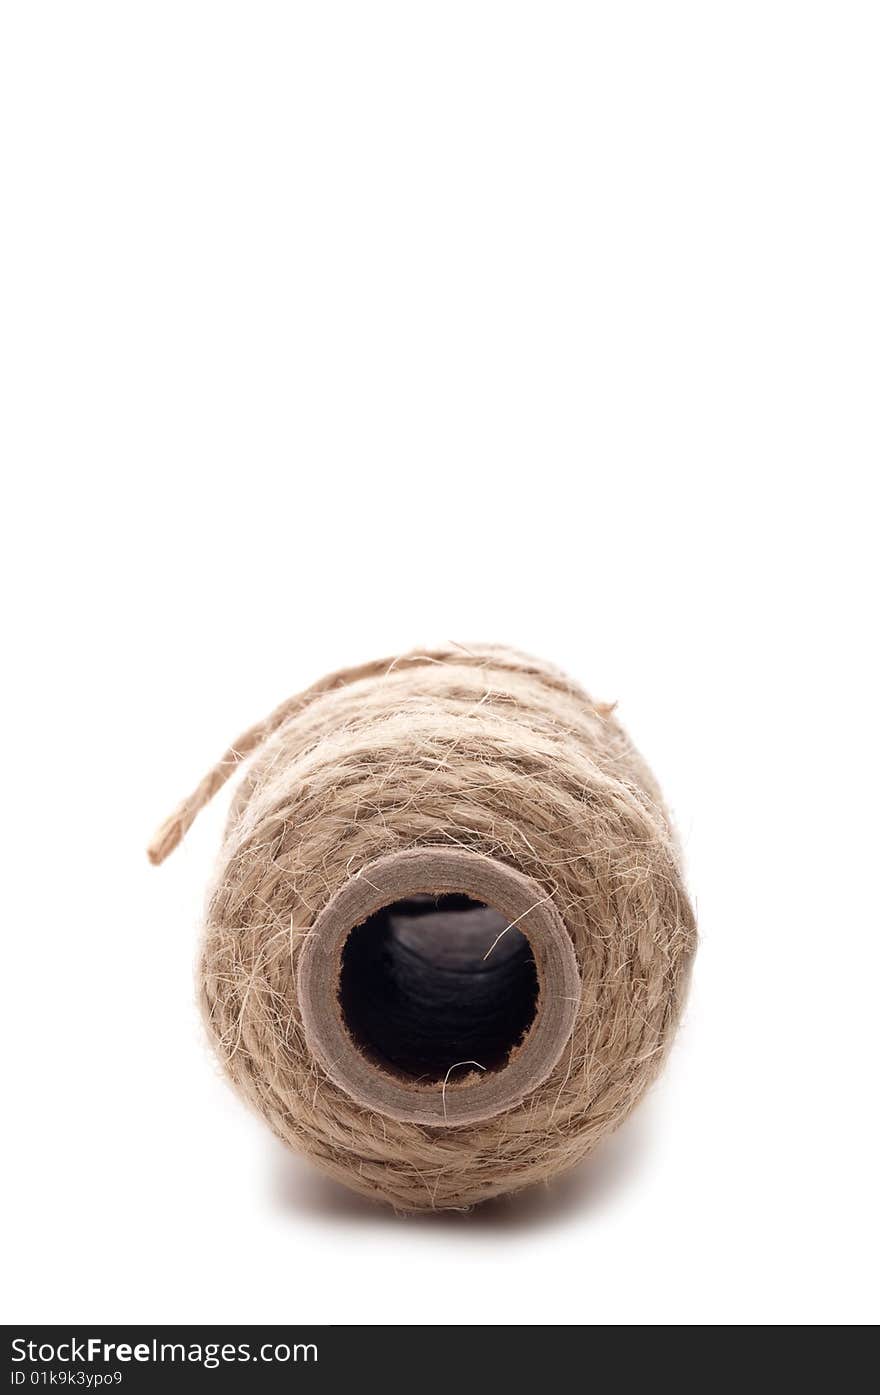 Vertical close up of the end of a spool of twine